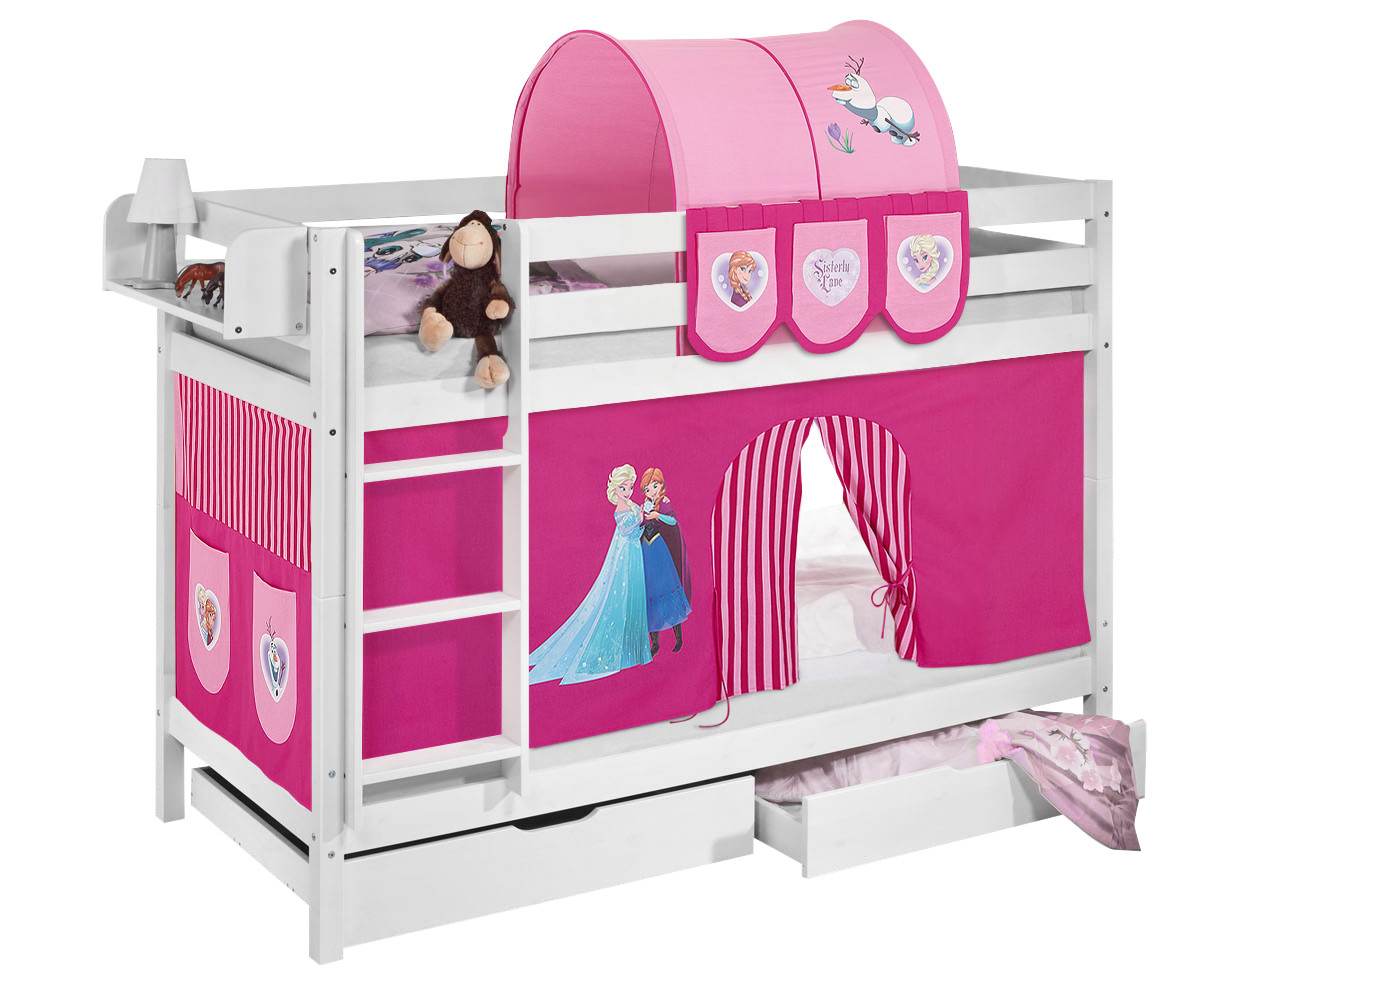 Bunk Beds Accessories, Mid Size Bunk Beds